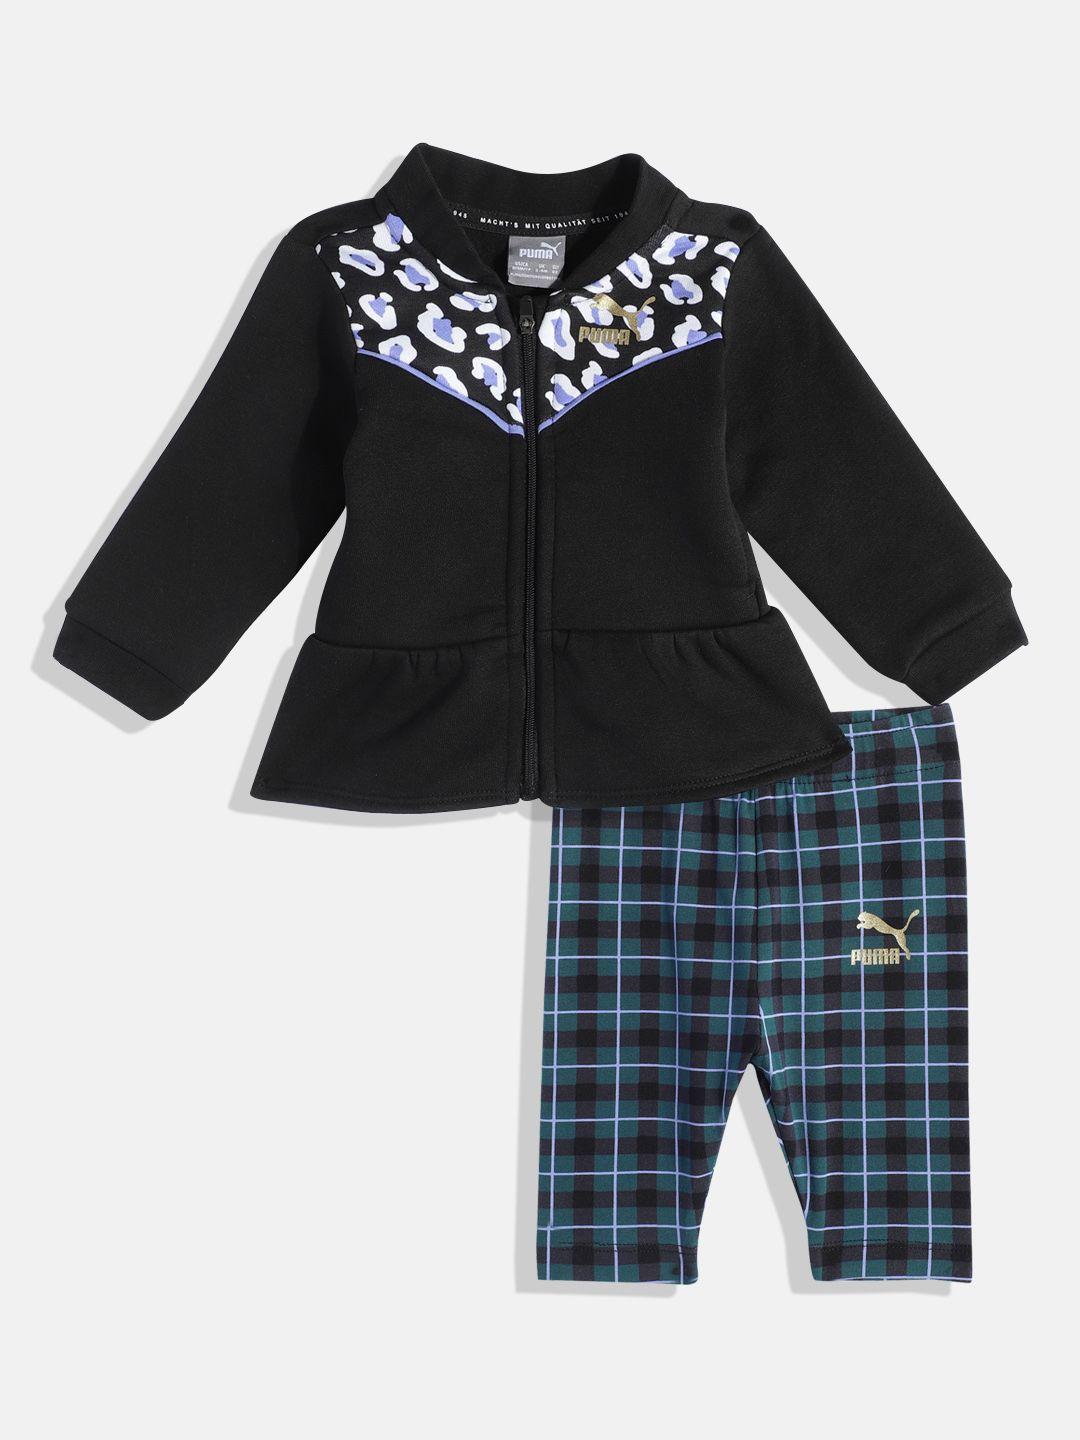 puma-infant-black-printed-peplum-top-with-blue-checked-trousers